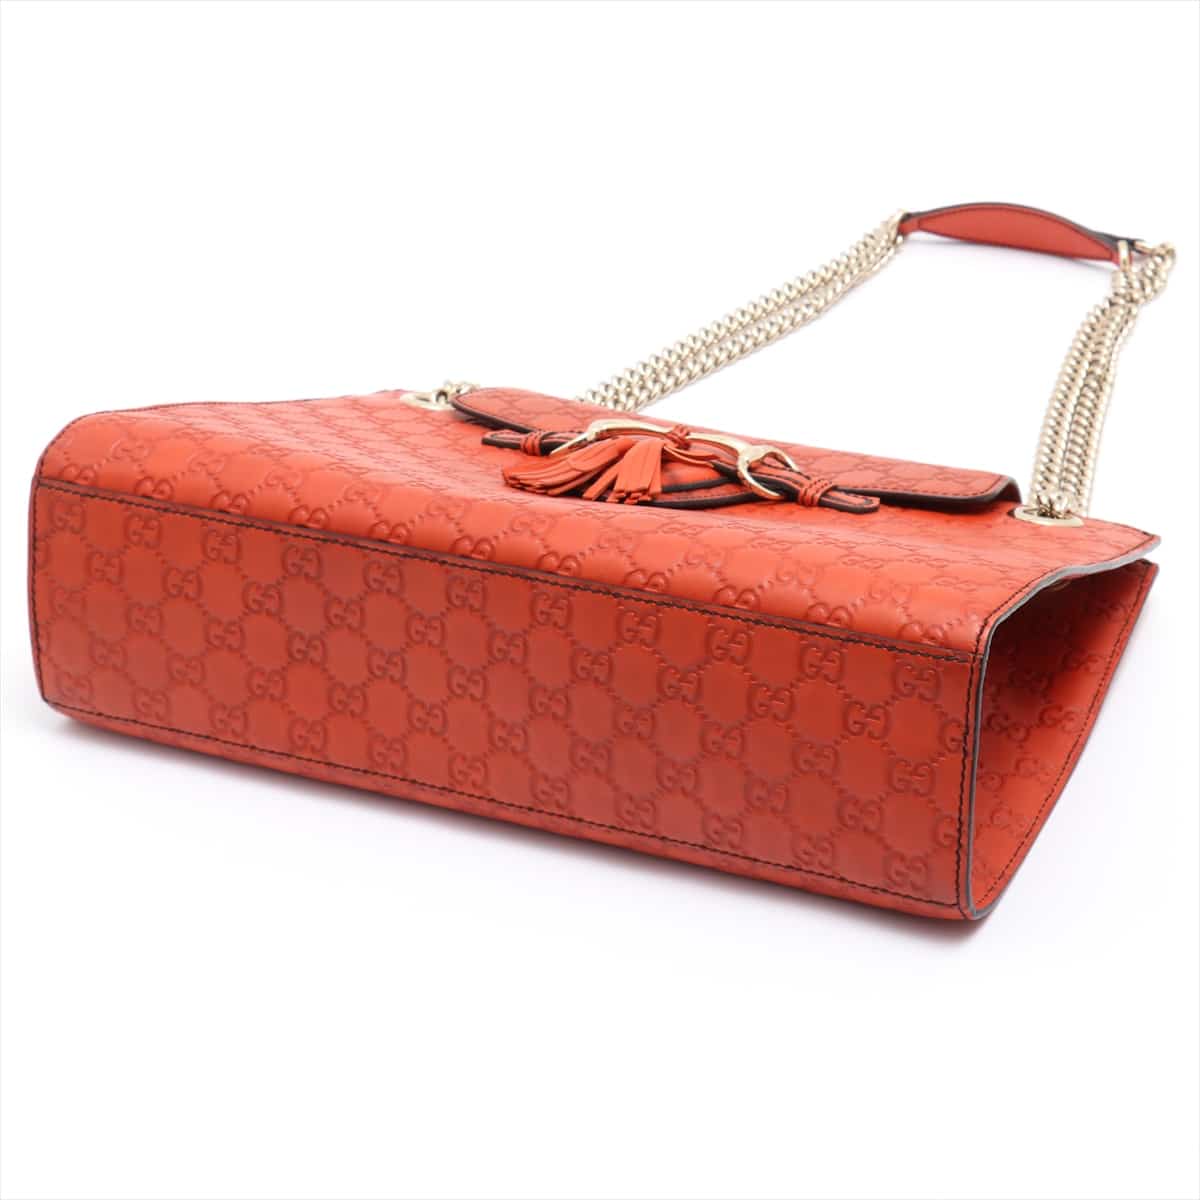 Gucci Emily Guccissima Leather Chain shoulder bag Red 295403